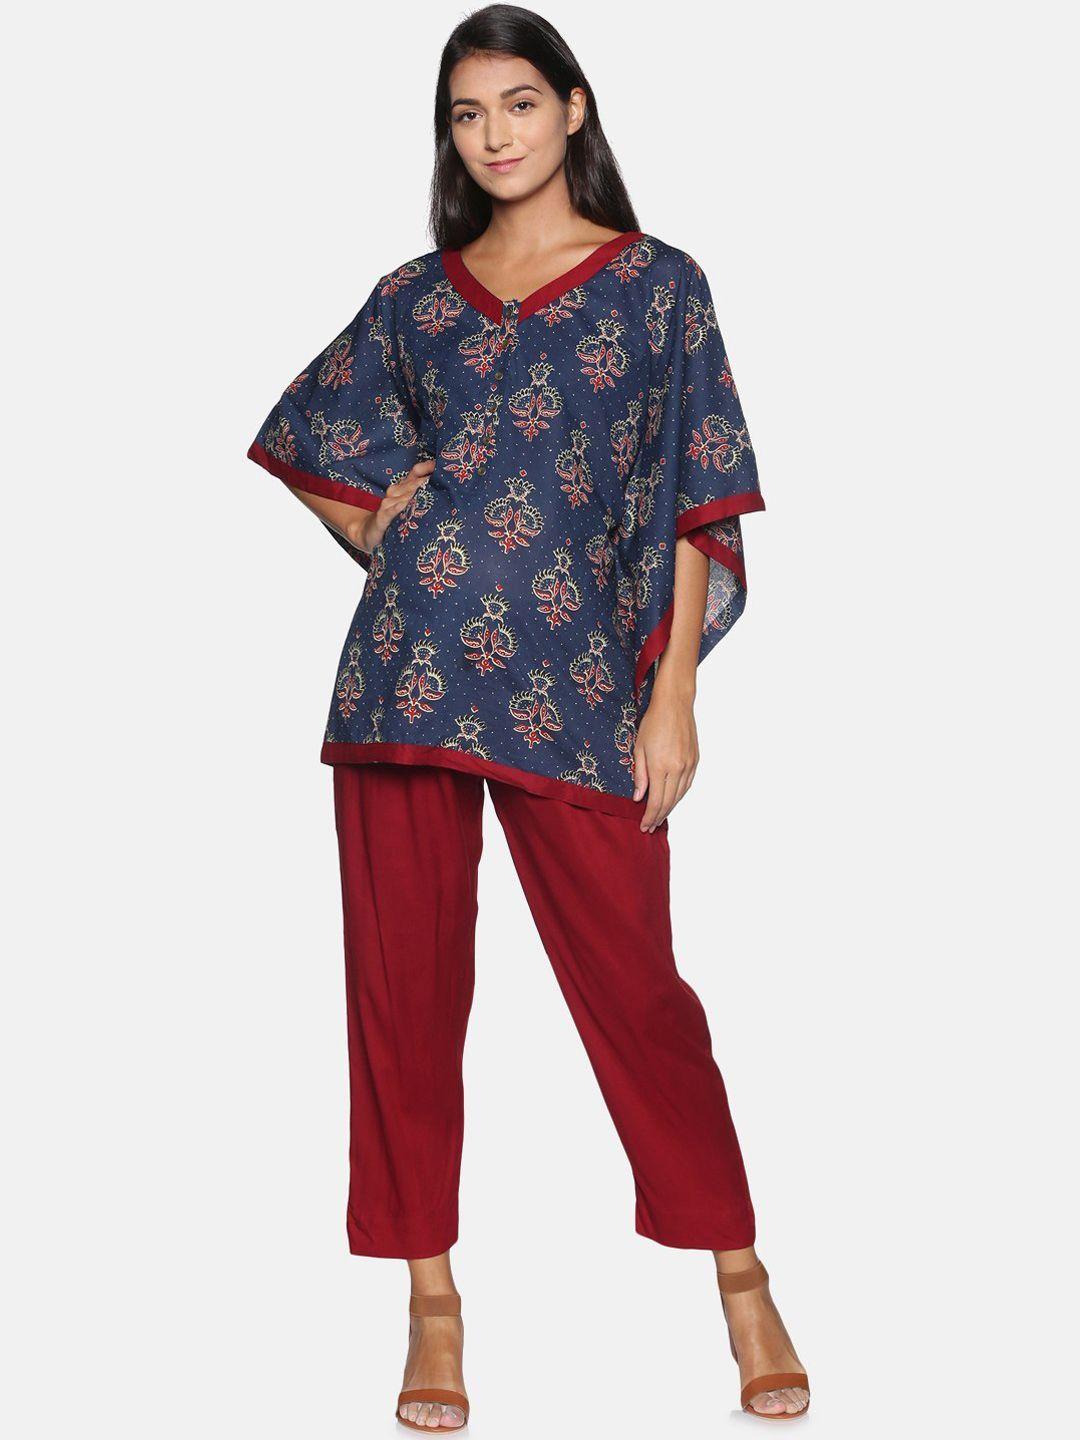 the-mom-store-women-navy-blue-&-maroon-printed-pure-cotton-kaftan-maternity-night-suit